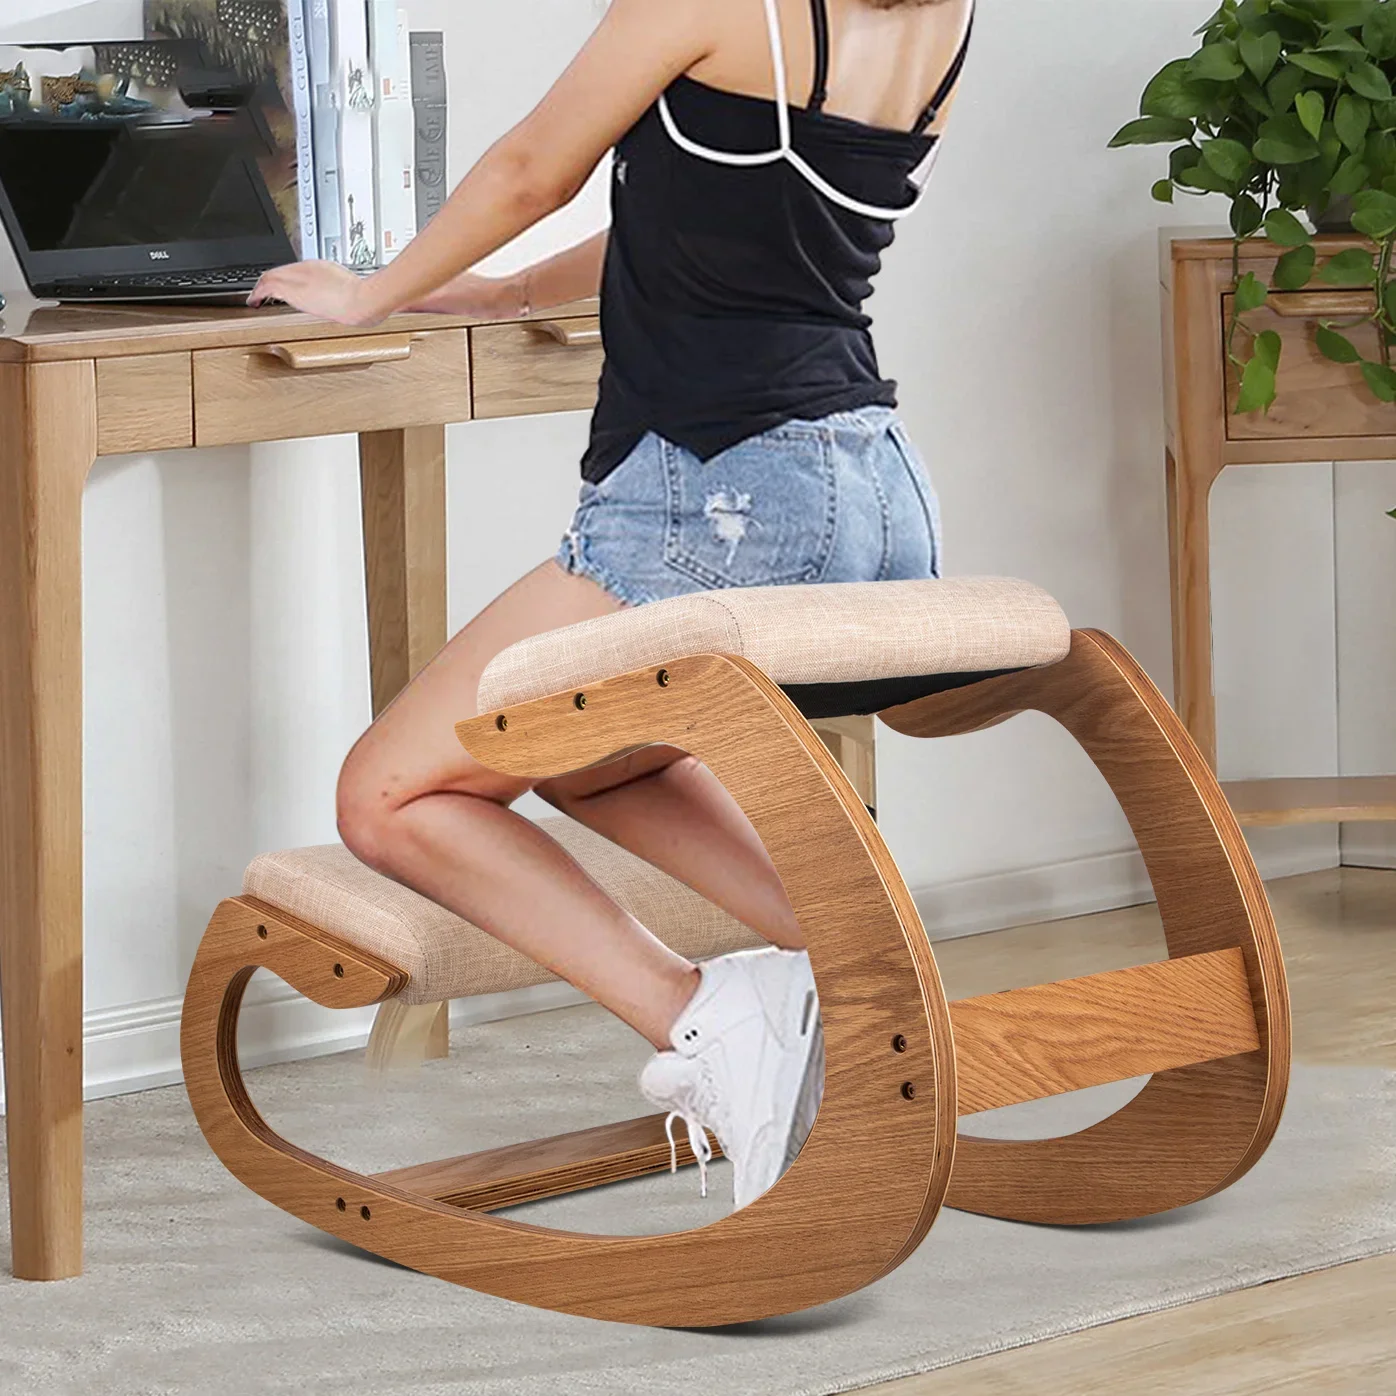 

Home Ergonomic Kneeling Chair Stool W/ Thick Cushion Office Chair Improving Body Posture Rocking Wood Knee Computer Chair